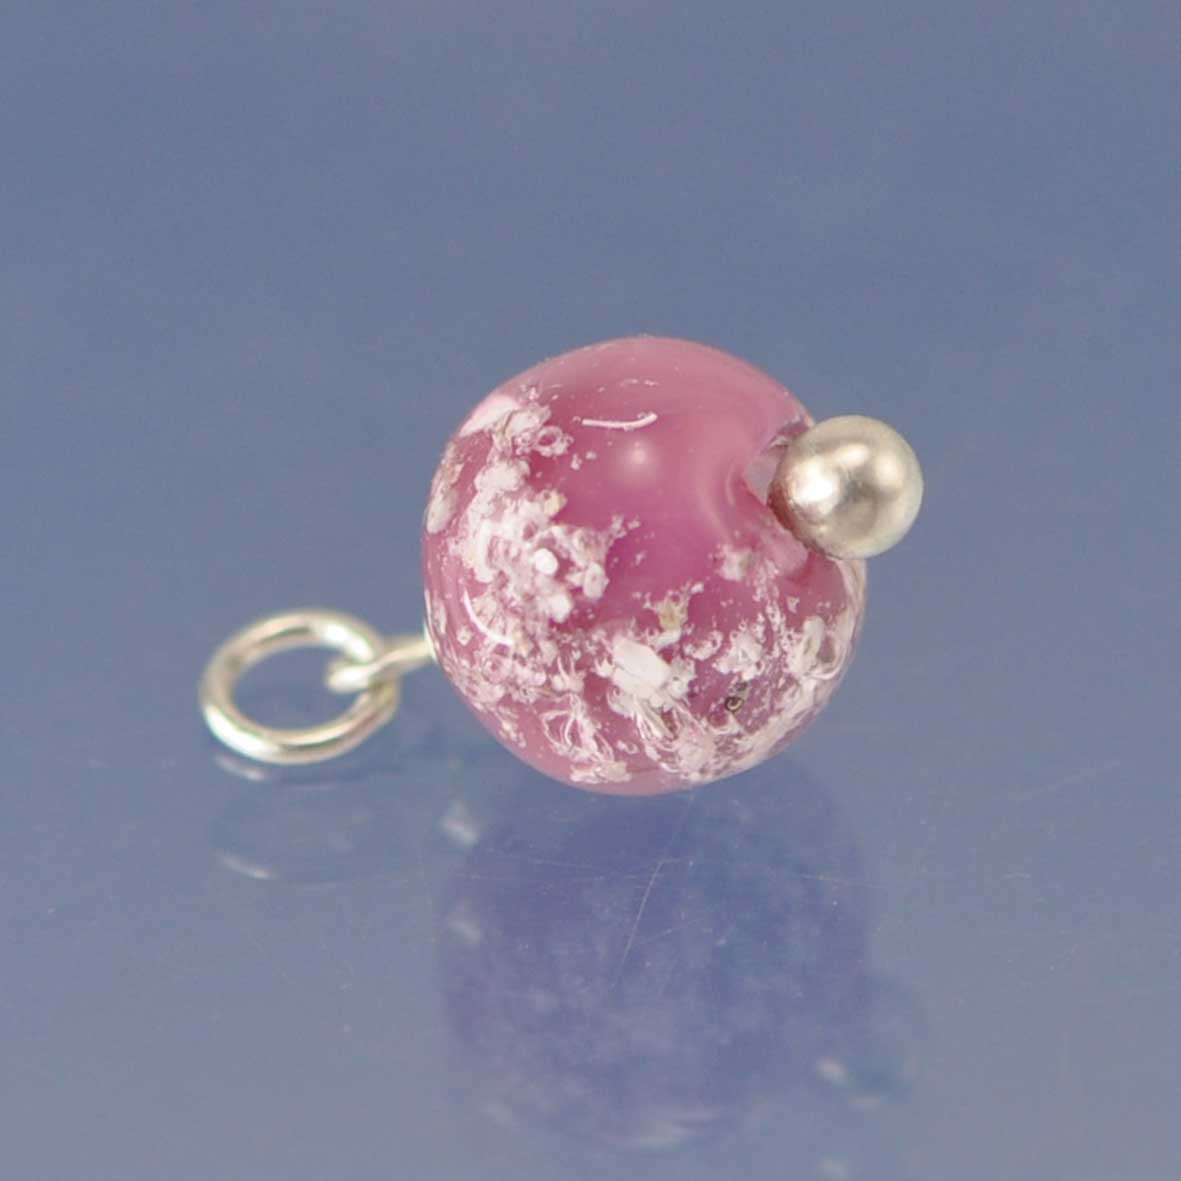 Cremation Ashes Into Glass Bead Drop Bead by Chris Parry Jewellery